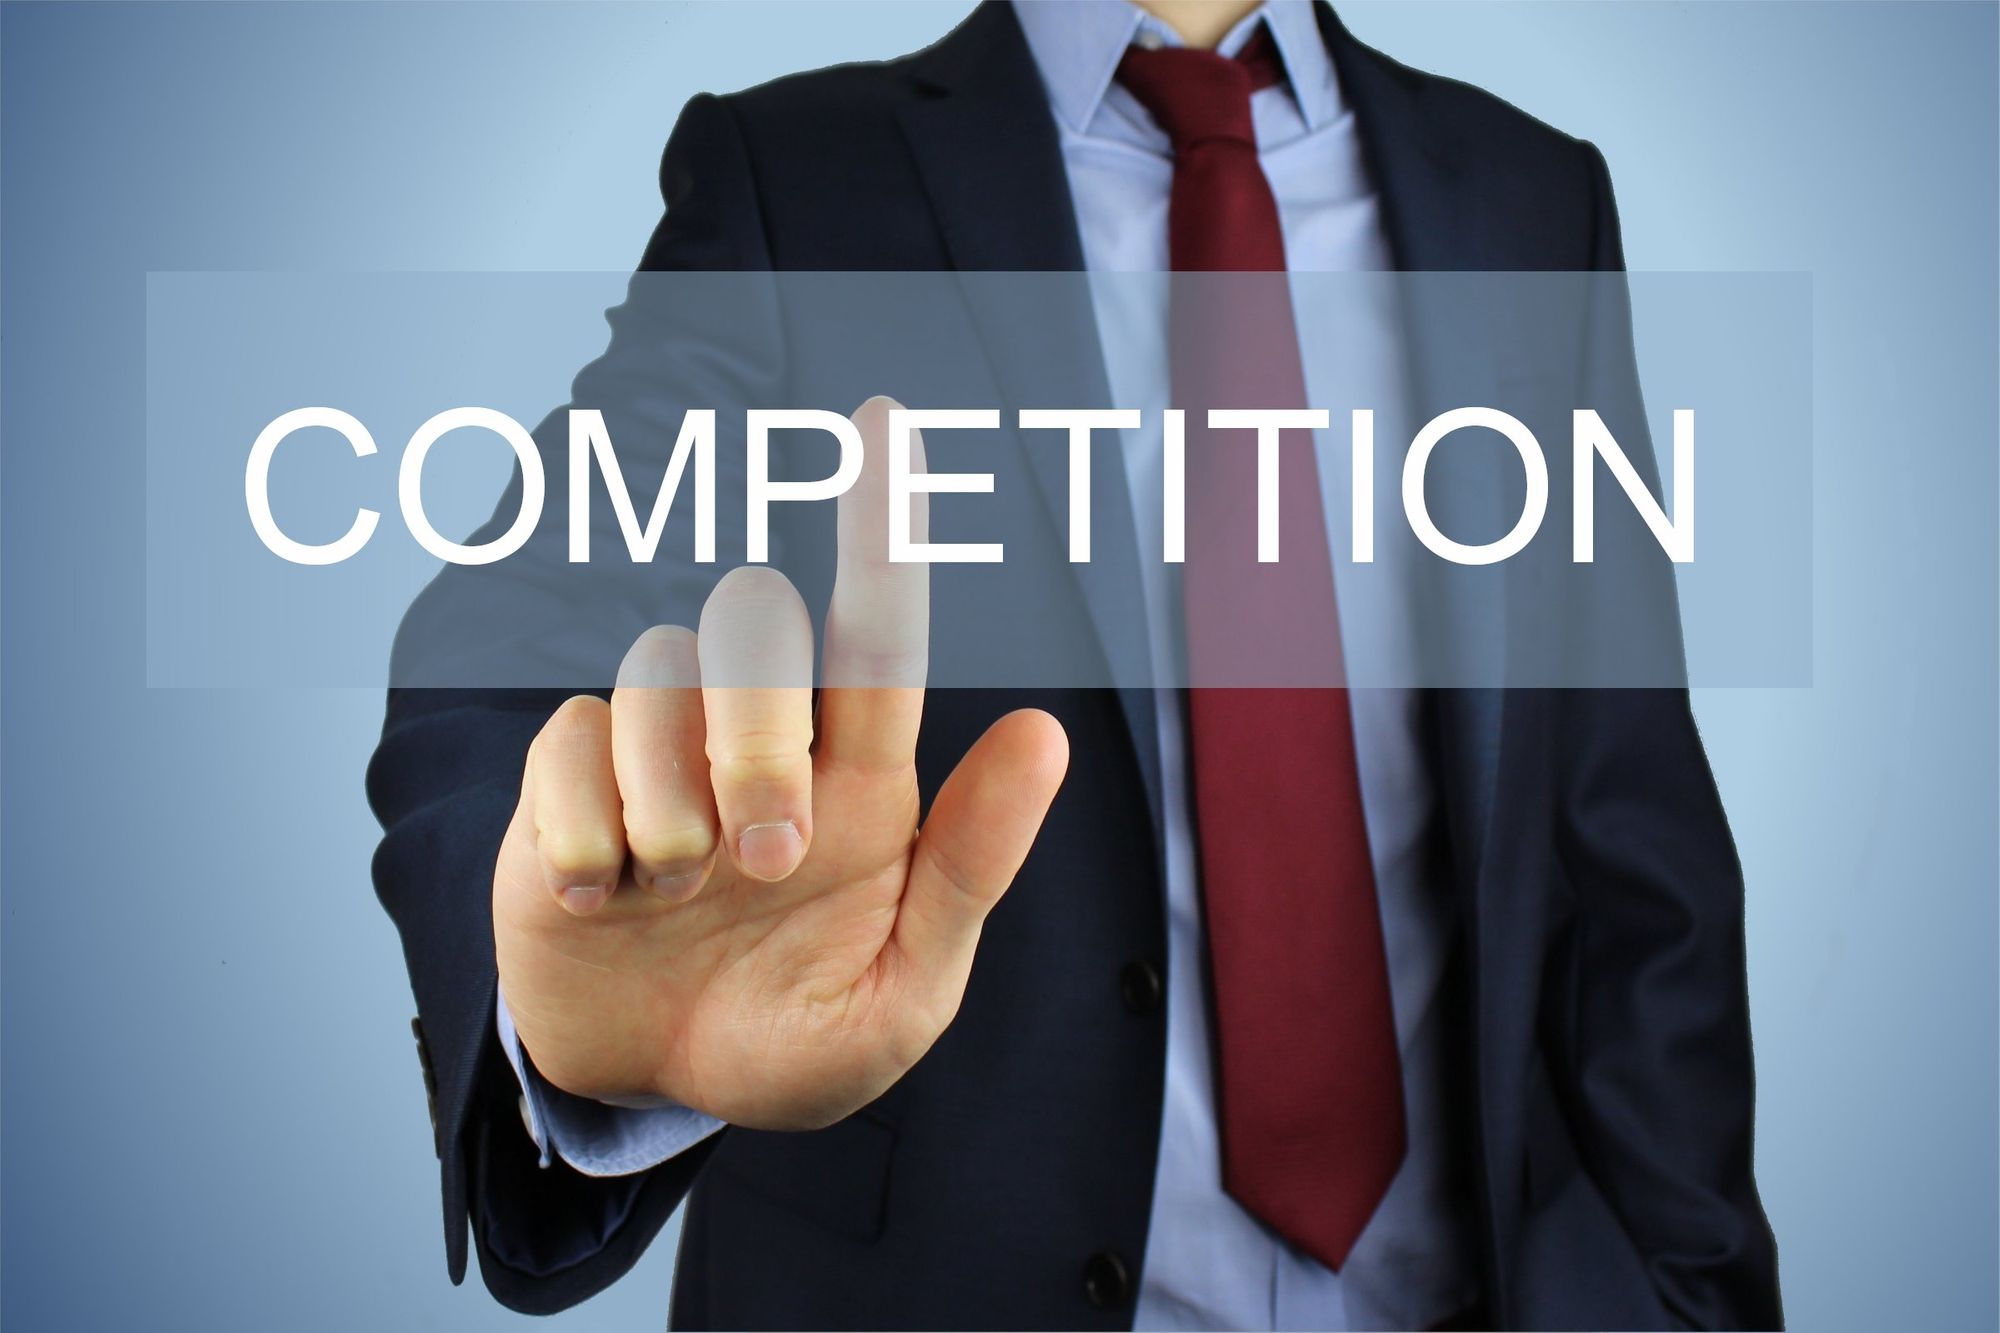 How to Beat the Competition in Sales